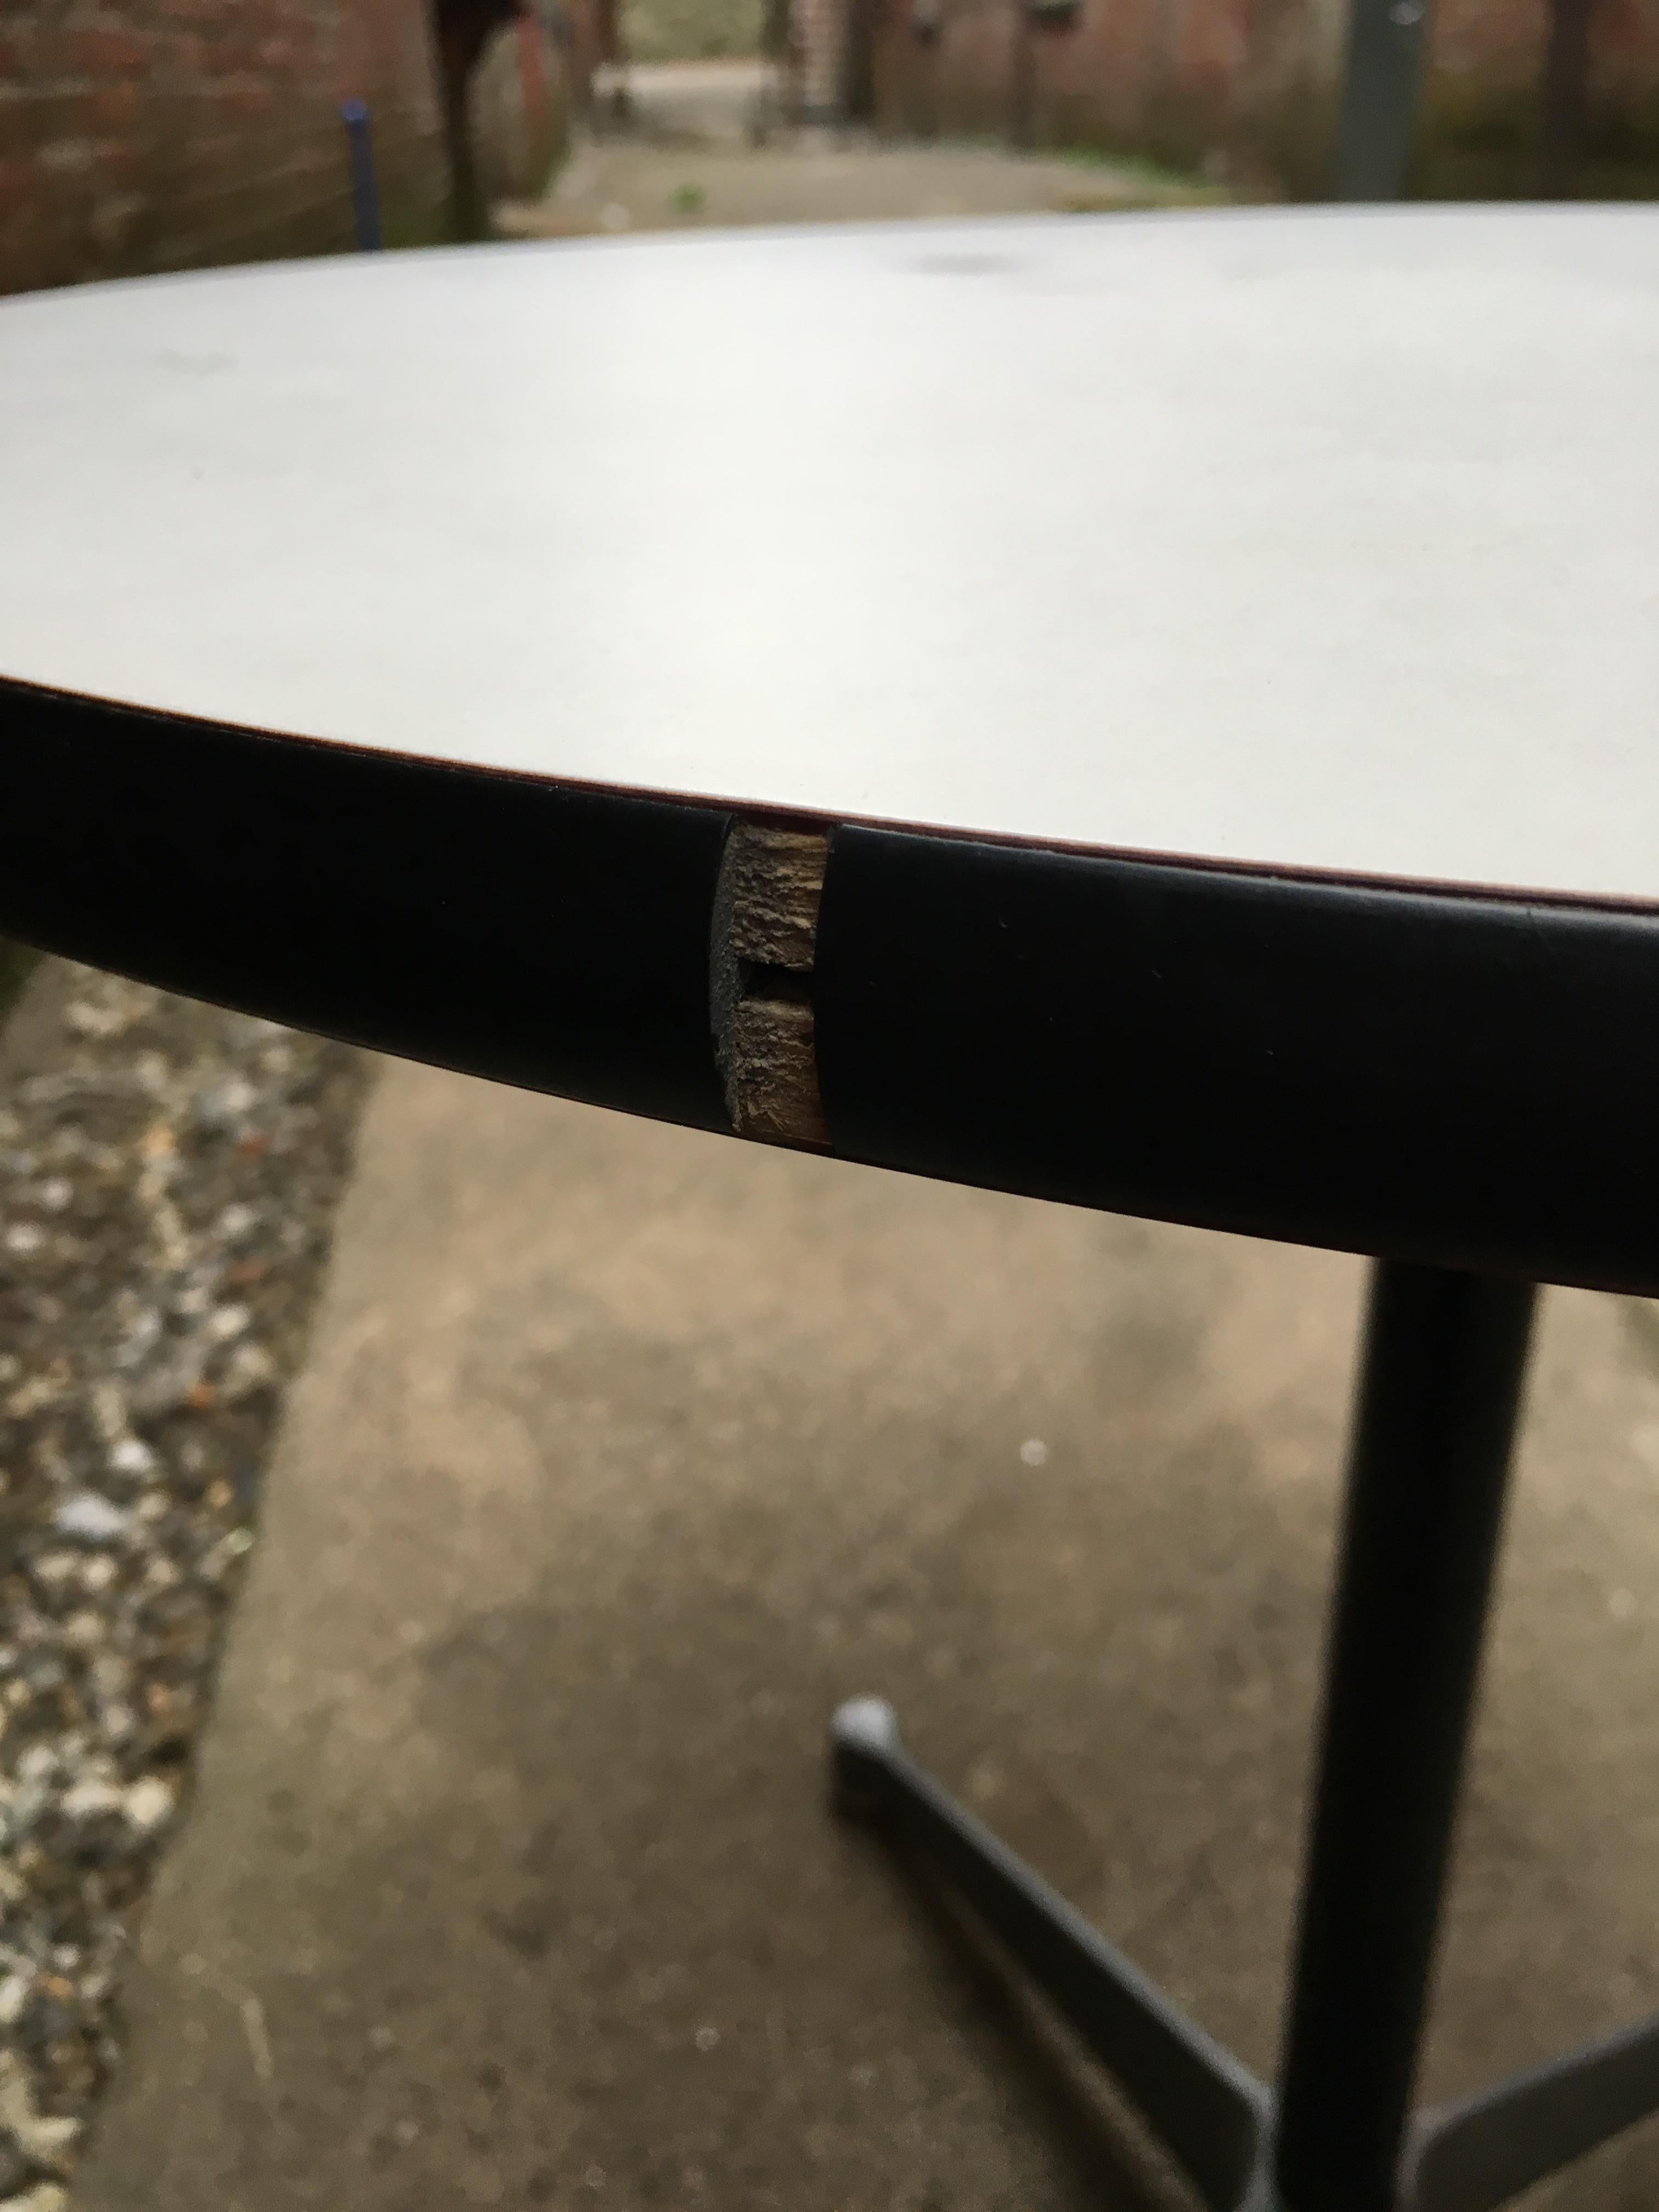 Early Charles Eames for Herman Miller Aluminum and Laminate Table 1